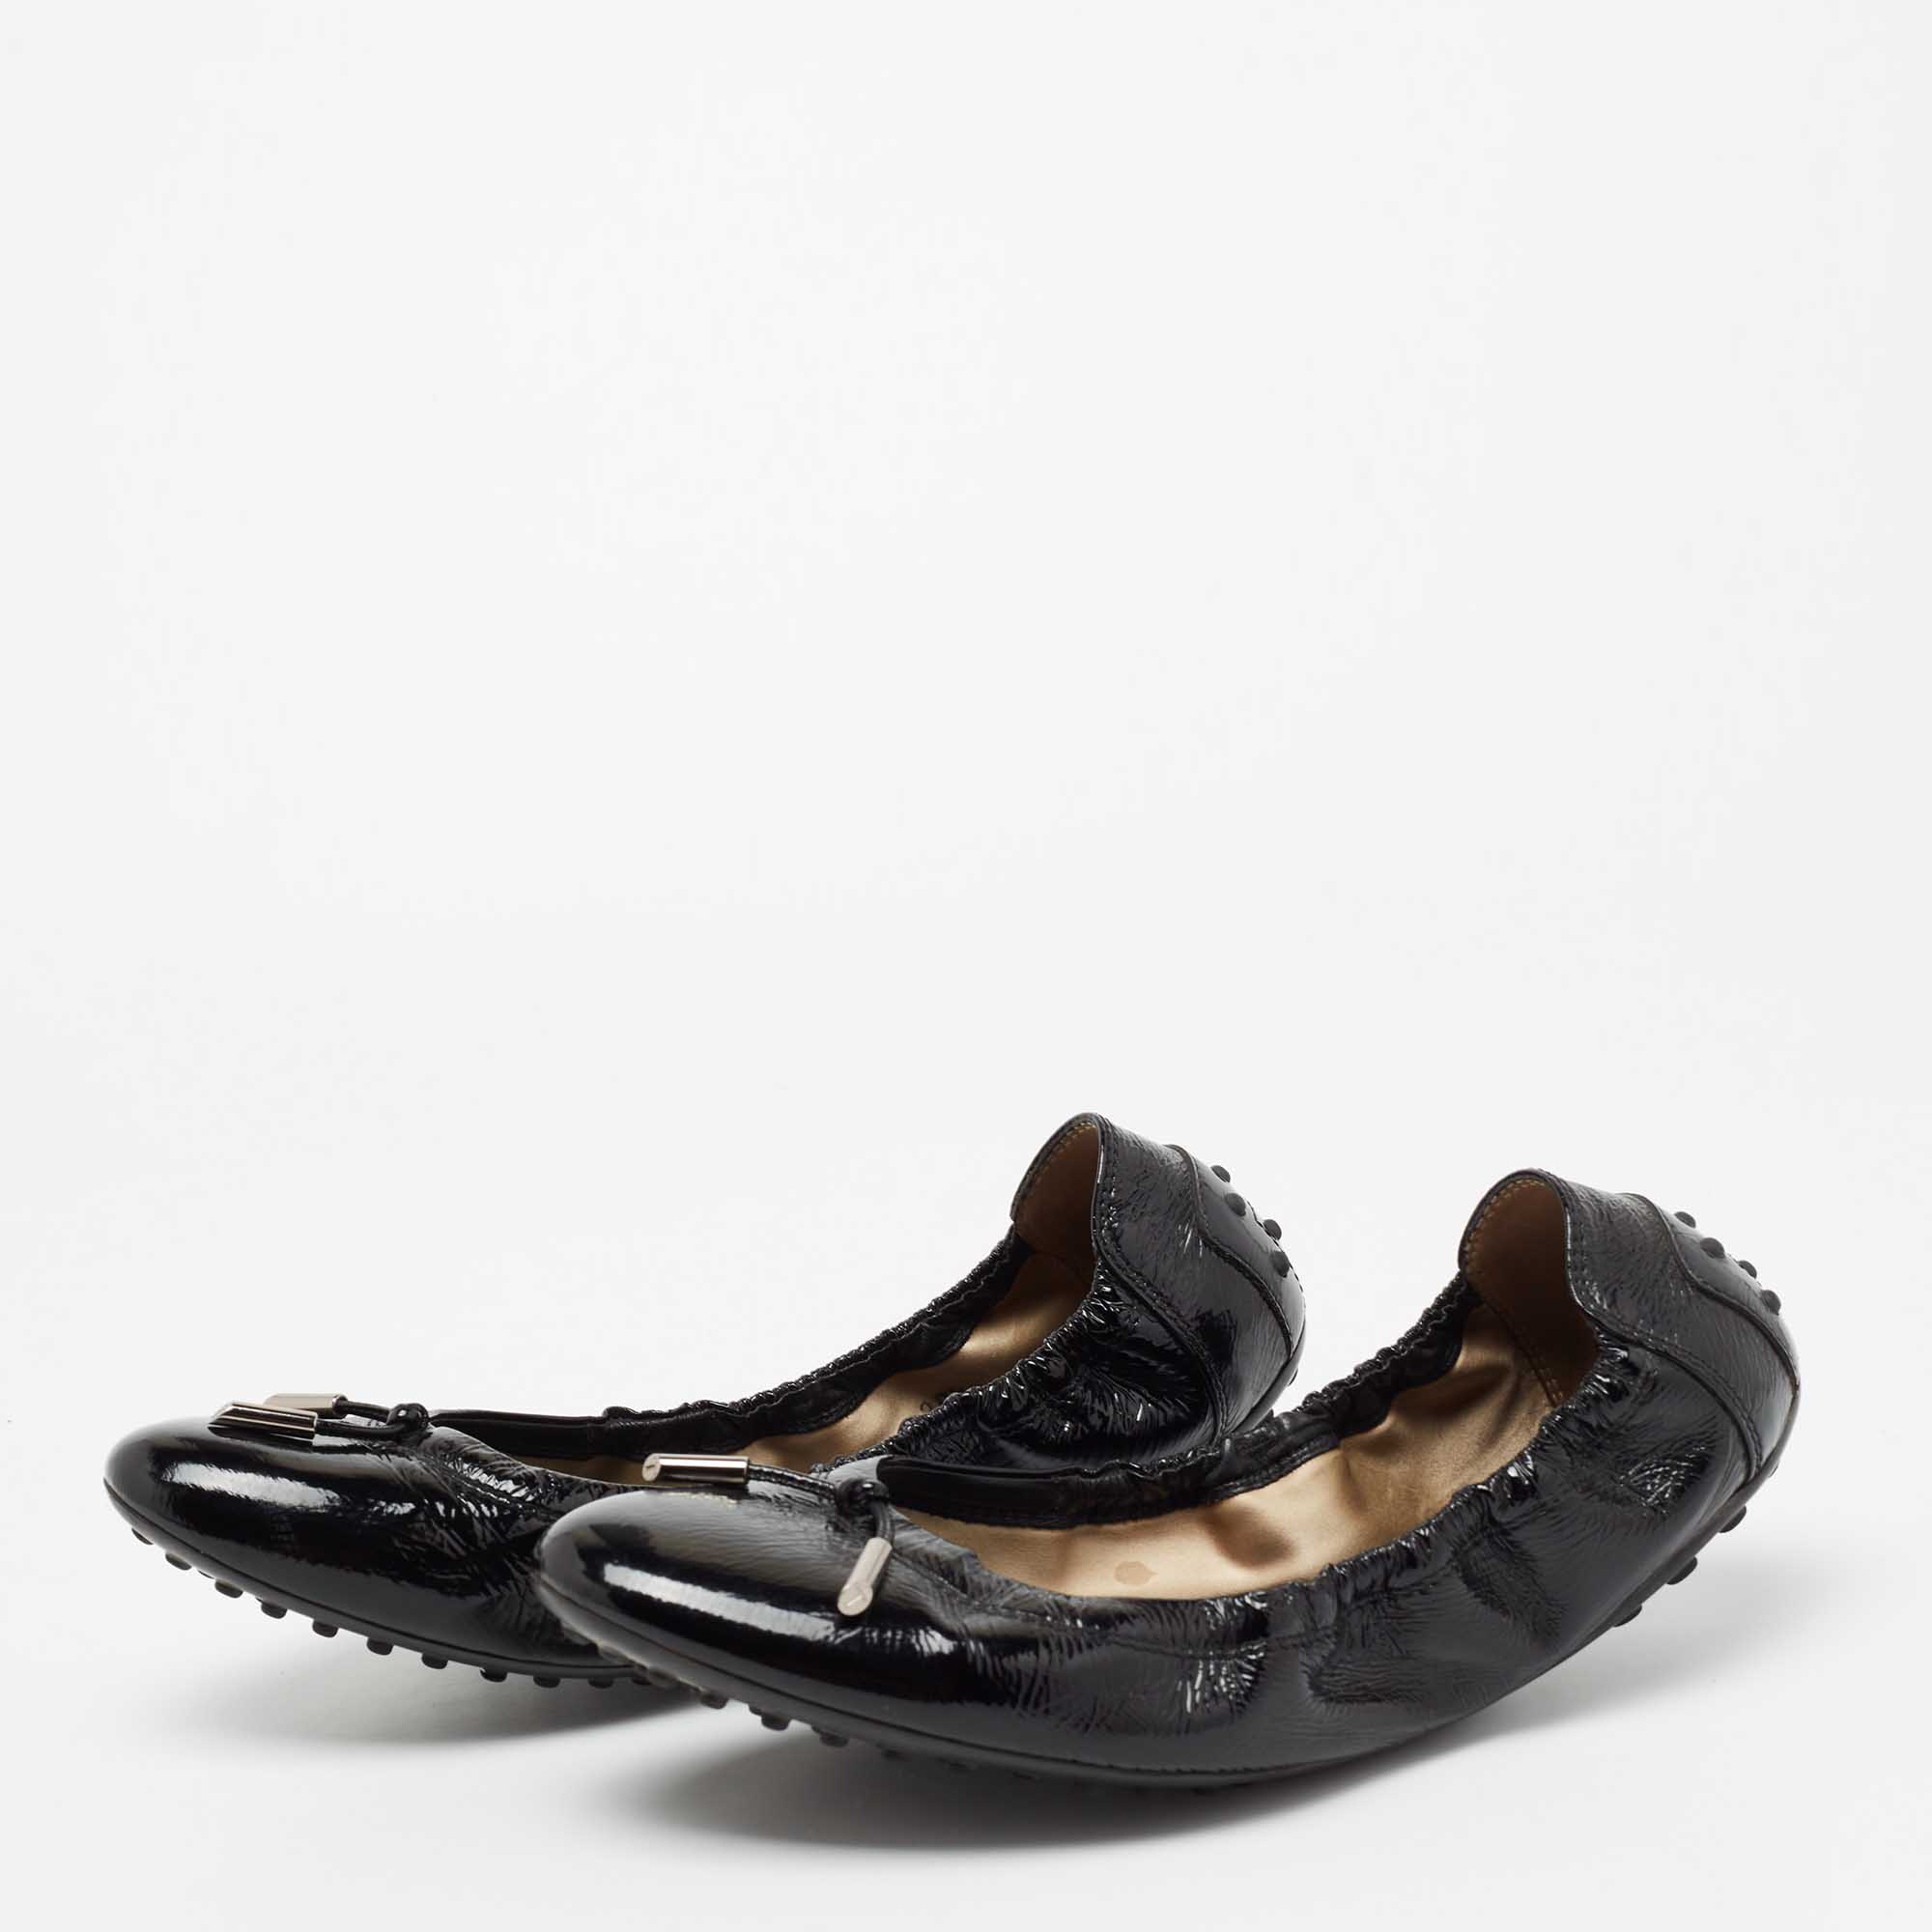 

Tod's Black Patent Leather Dee Scrunch Ballet Flats Size